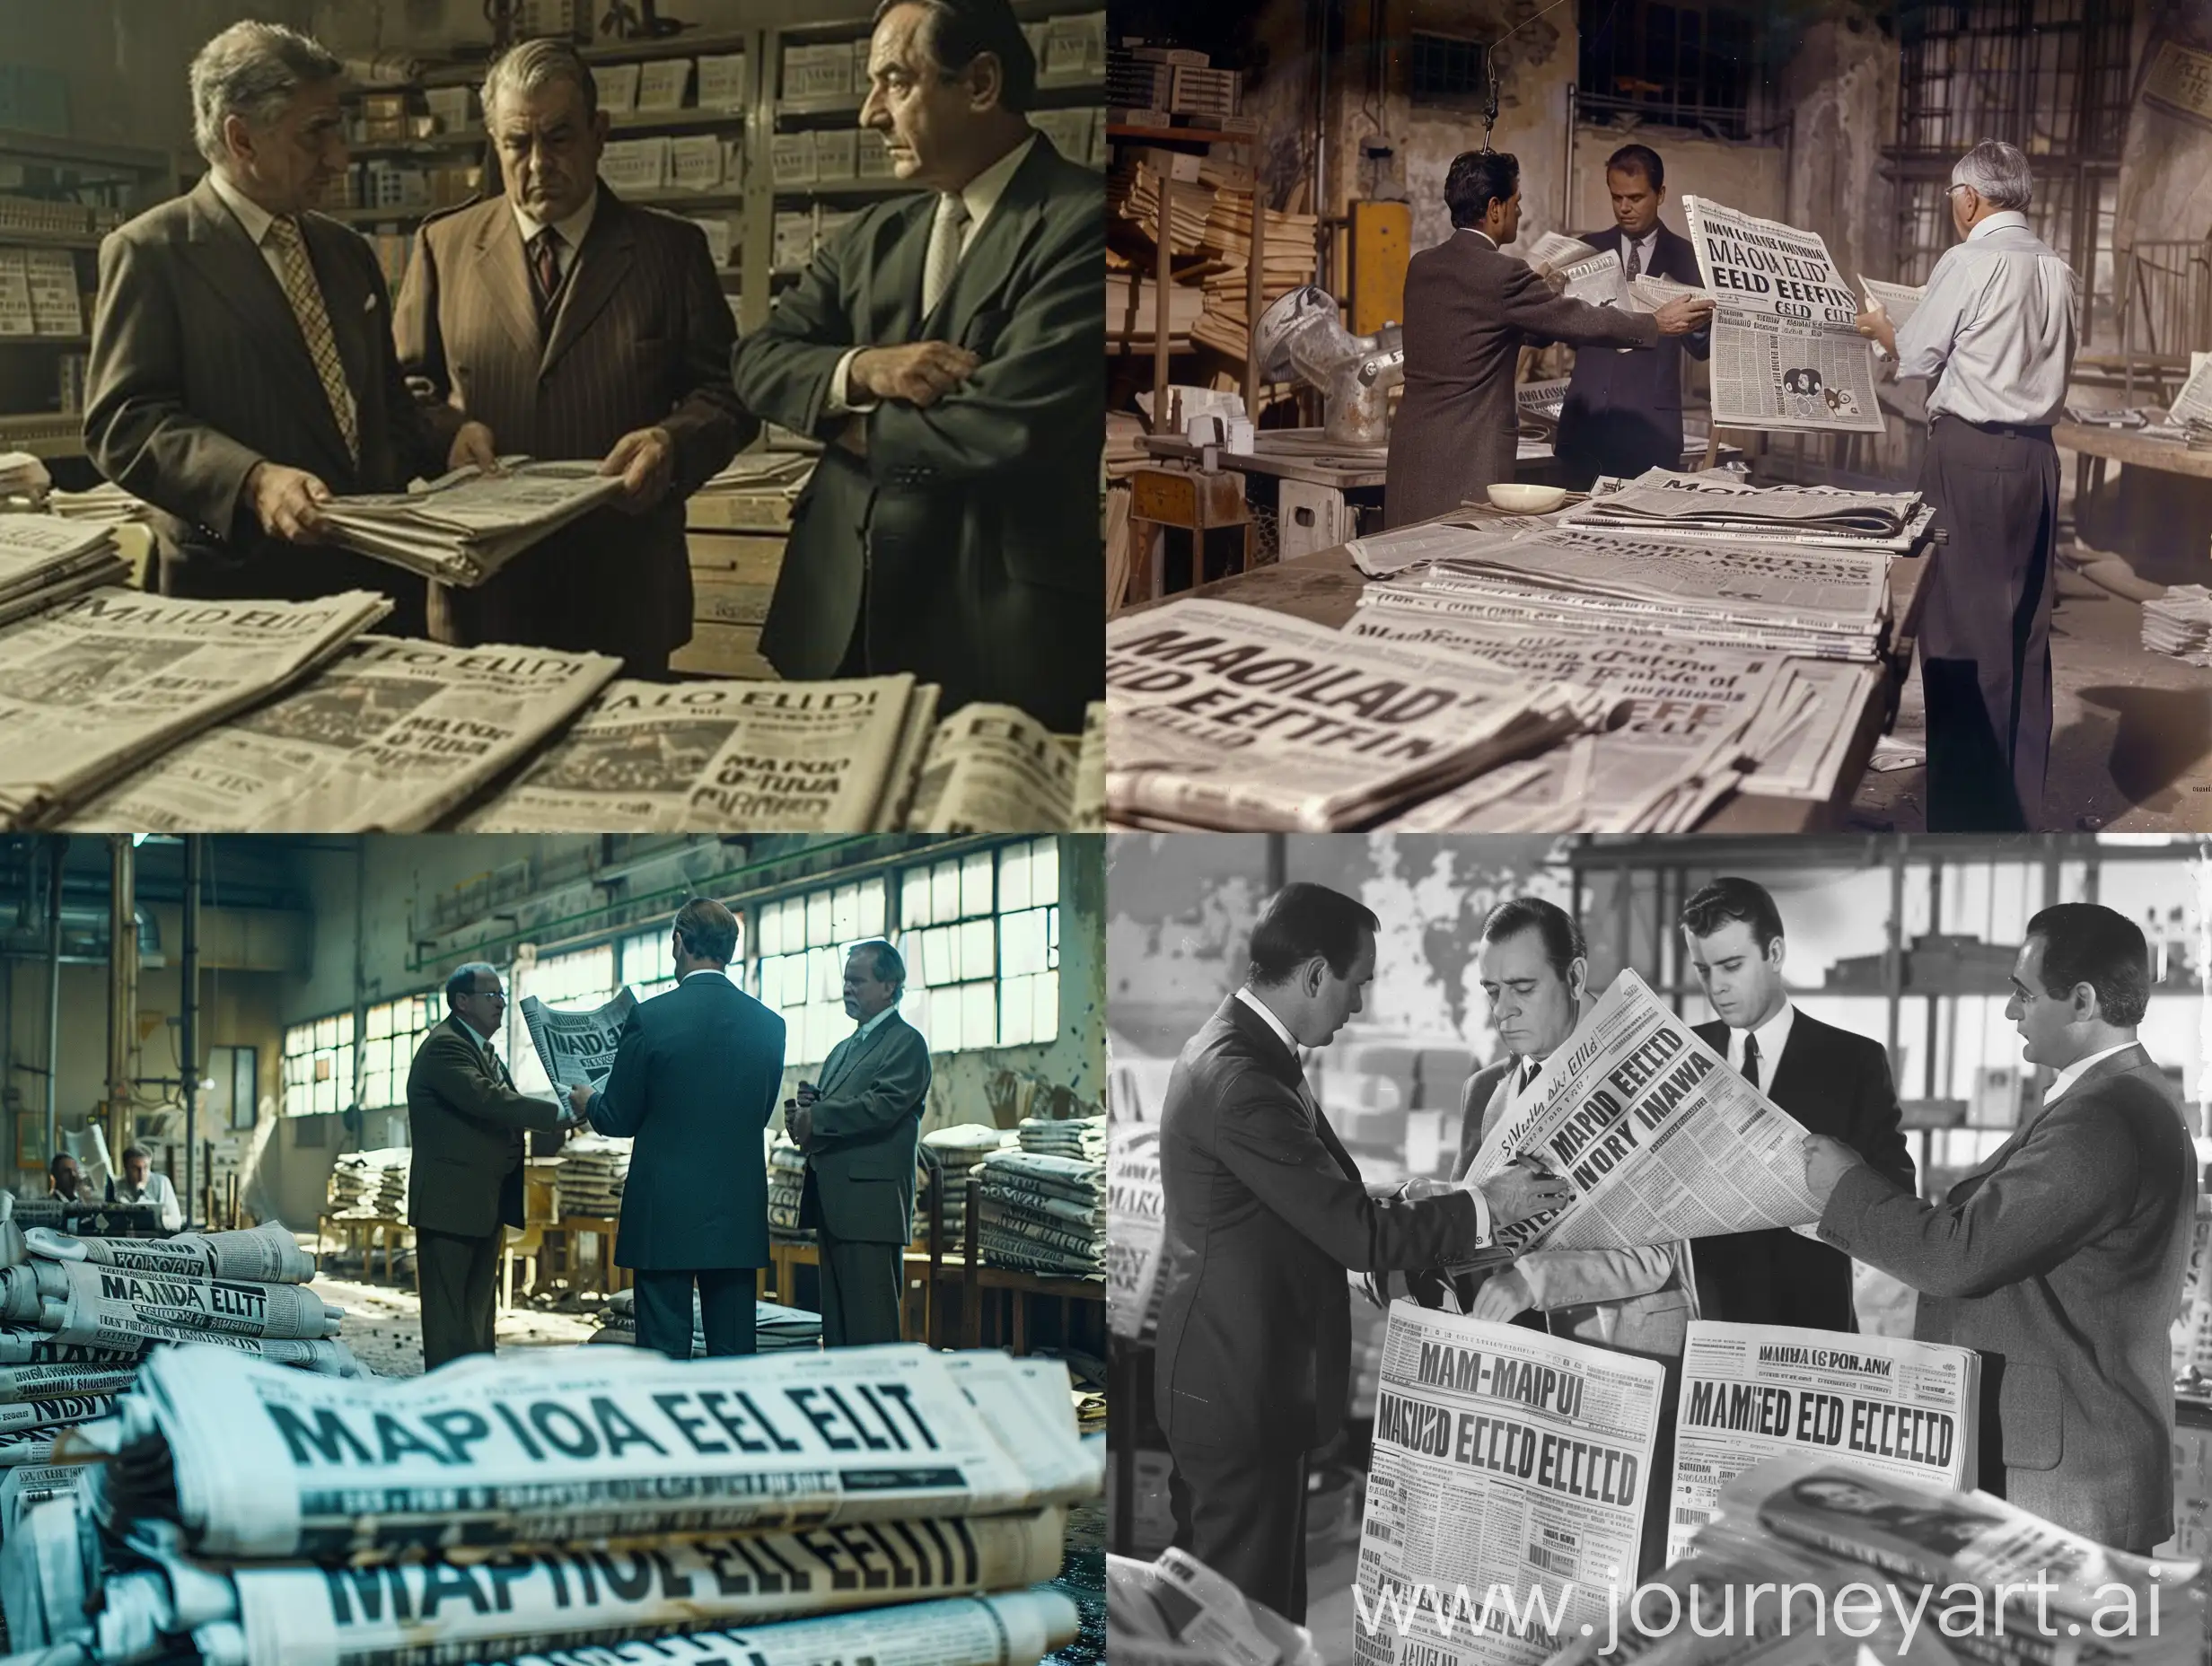 The newspaper factory that has Mafia Elite written inside the newspapers, and the heads of the factory are discussing